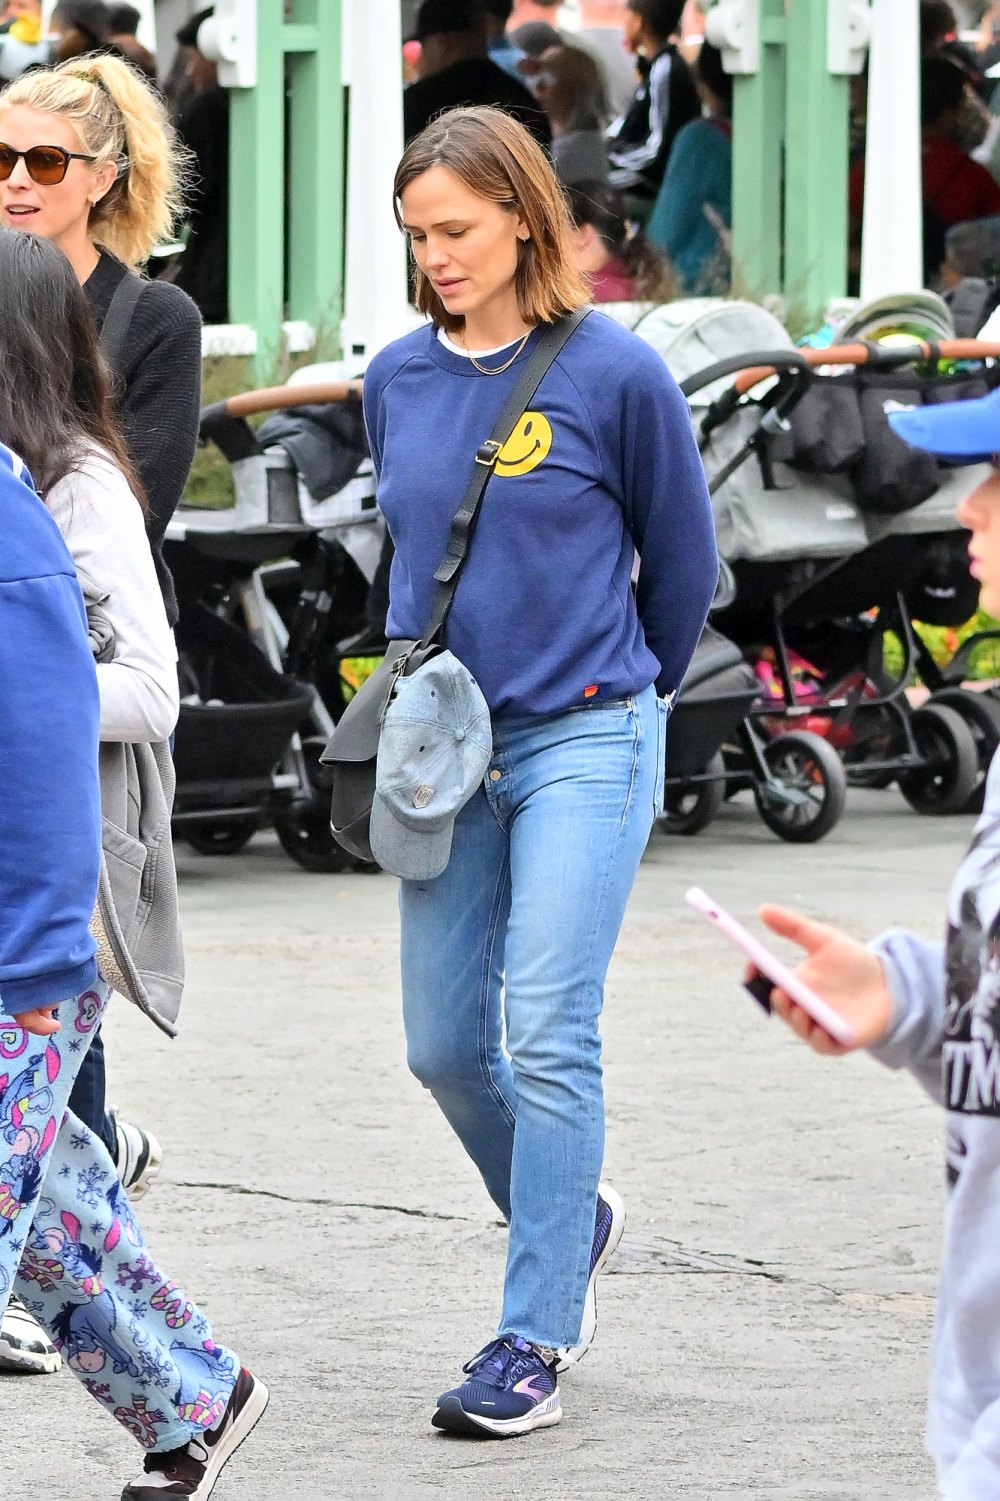 Jennifer-Garner-takes-Seraphina-and-Jennifer-Lopez-s-daughter-Emme-out-to-the-happiest-place-on-earth--Disneyland-165